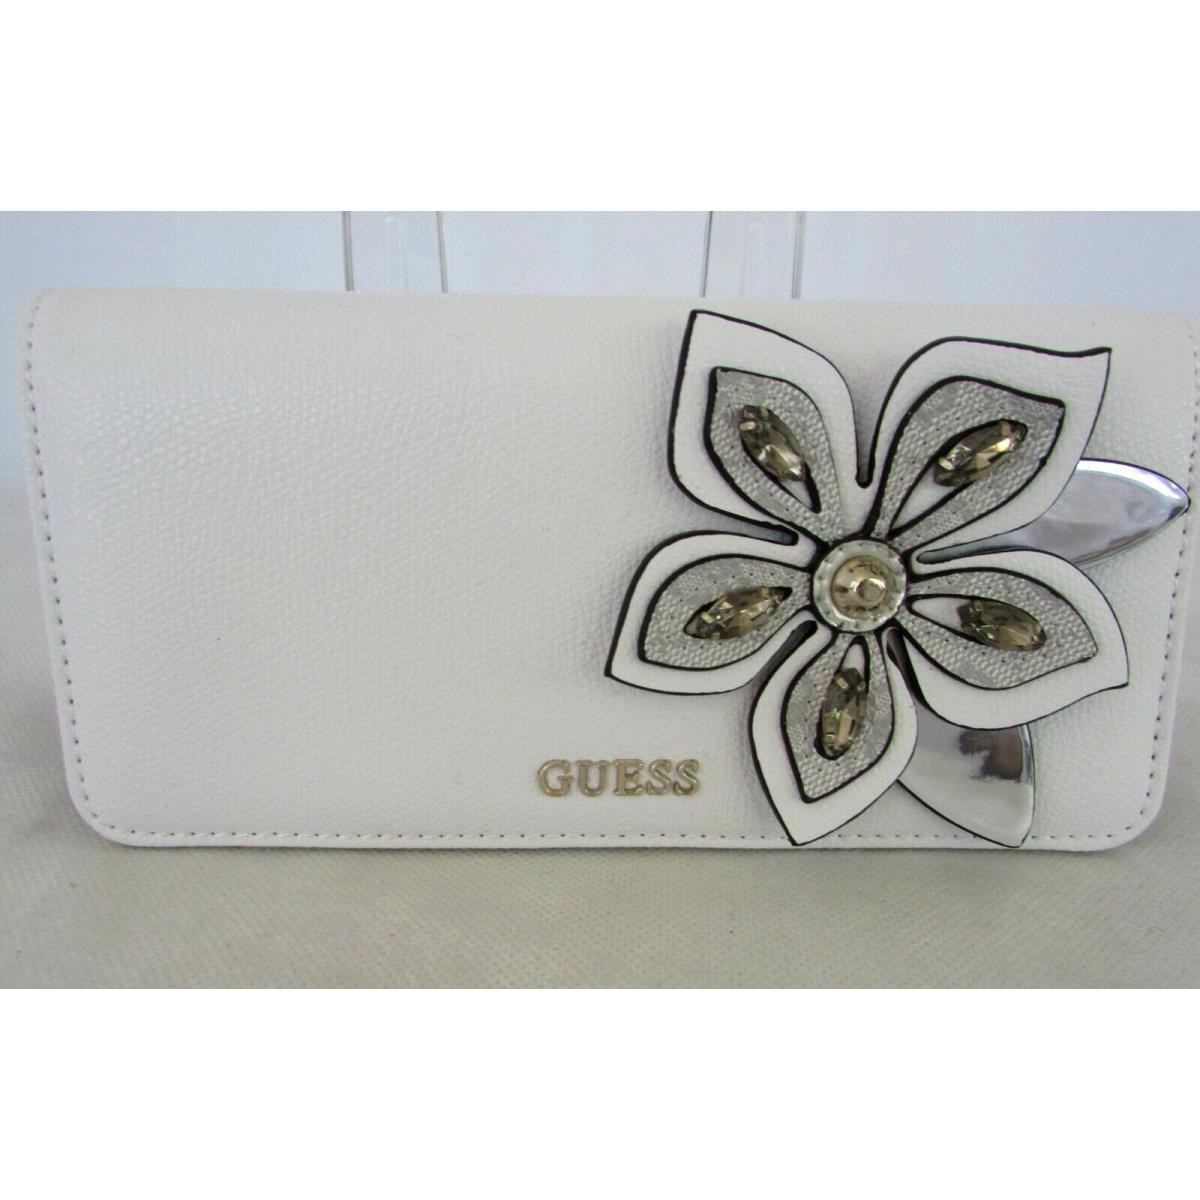 Guess Wallet Floral Ice Gray Large Trifold Rare